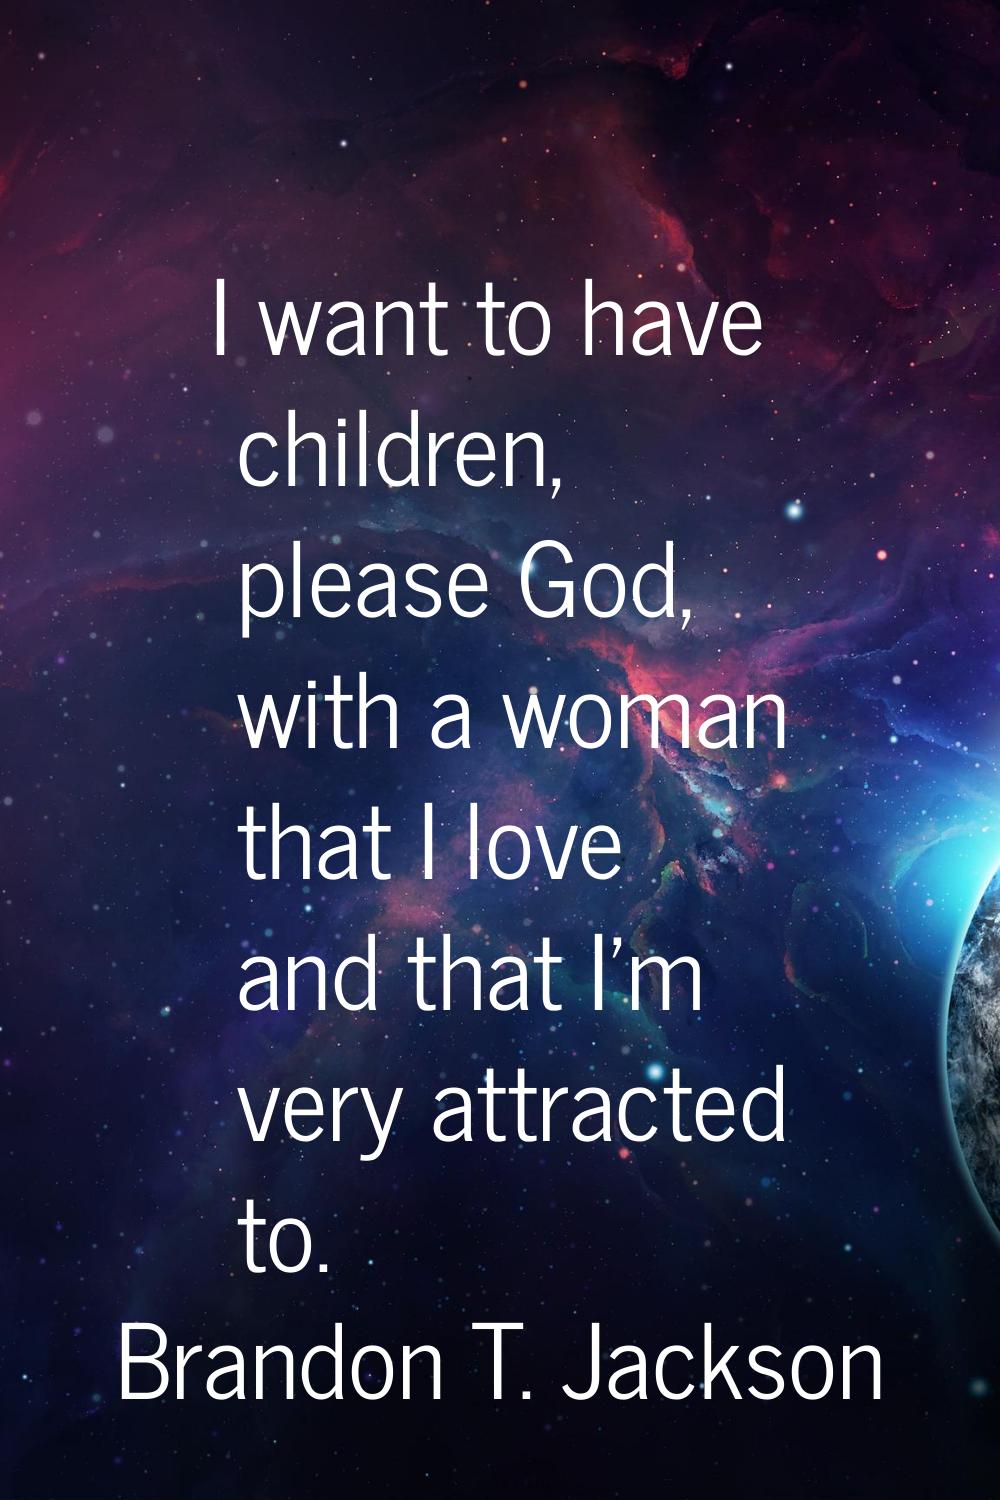 I want to have children, please God, with a woman that I love and that I'm very attracted to.